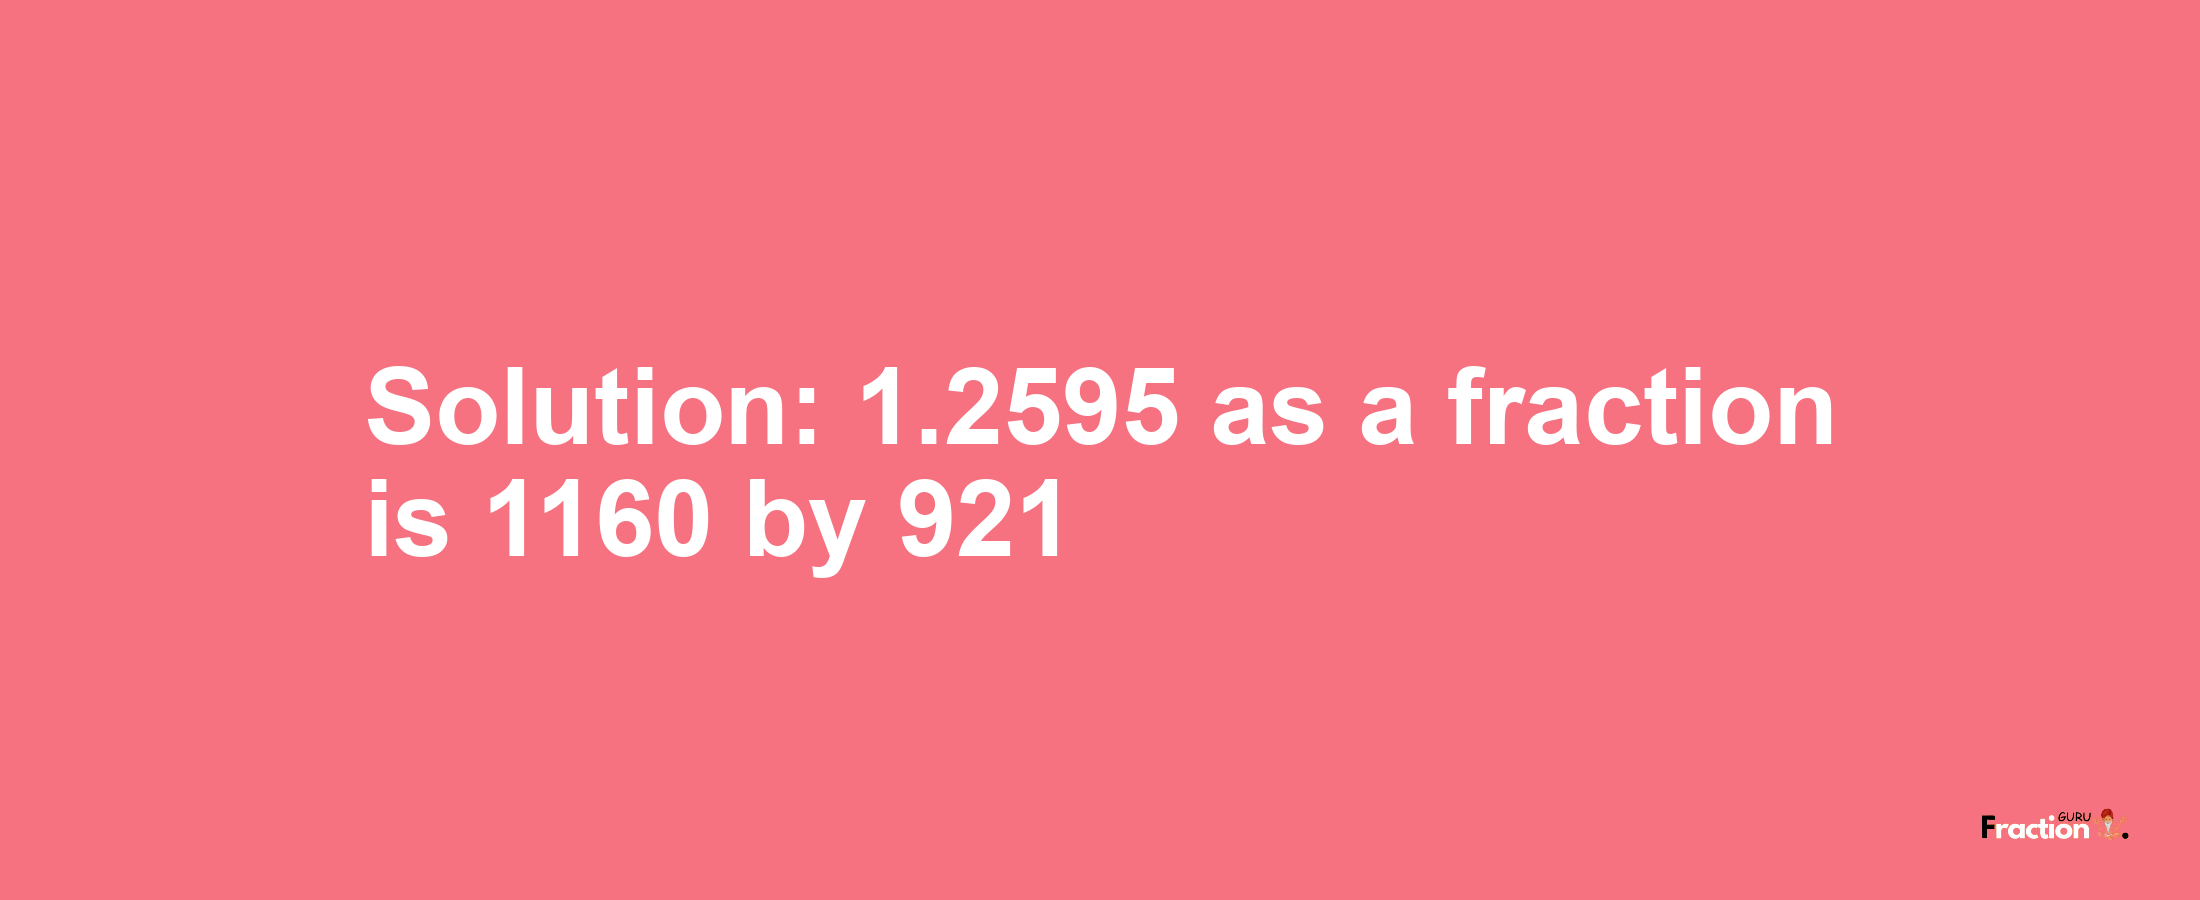 Solution:1.2595 as a fraction is 1160/921